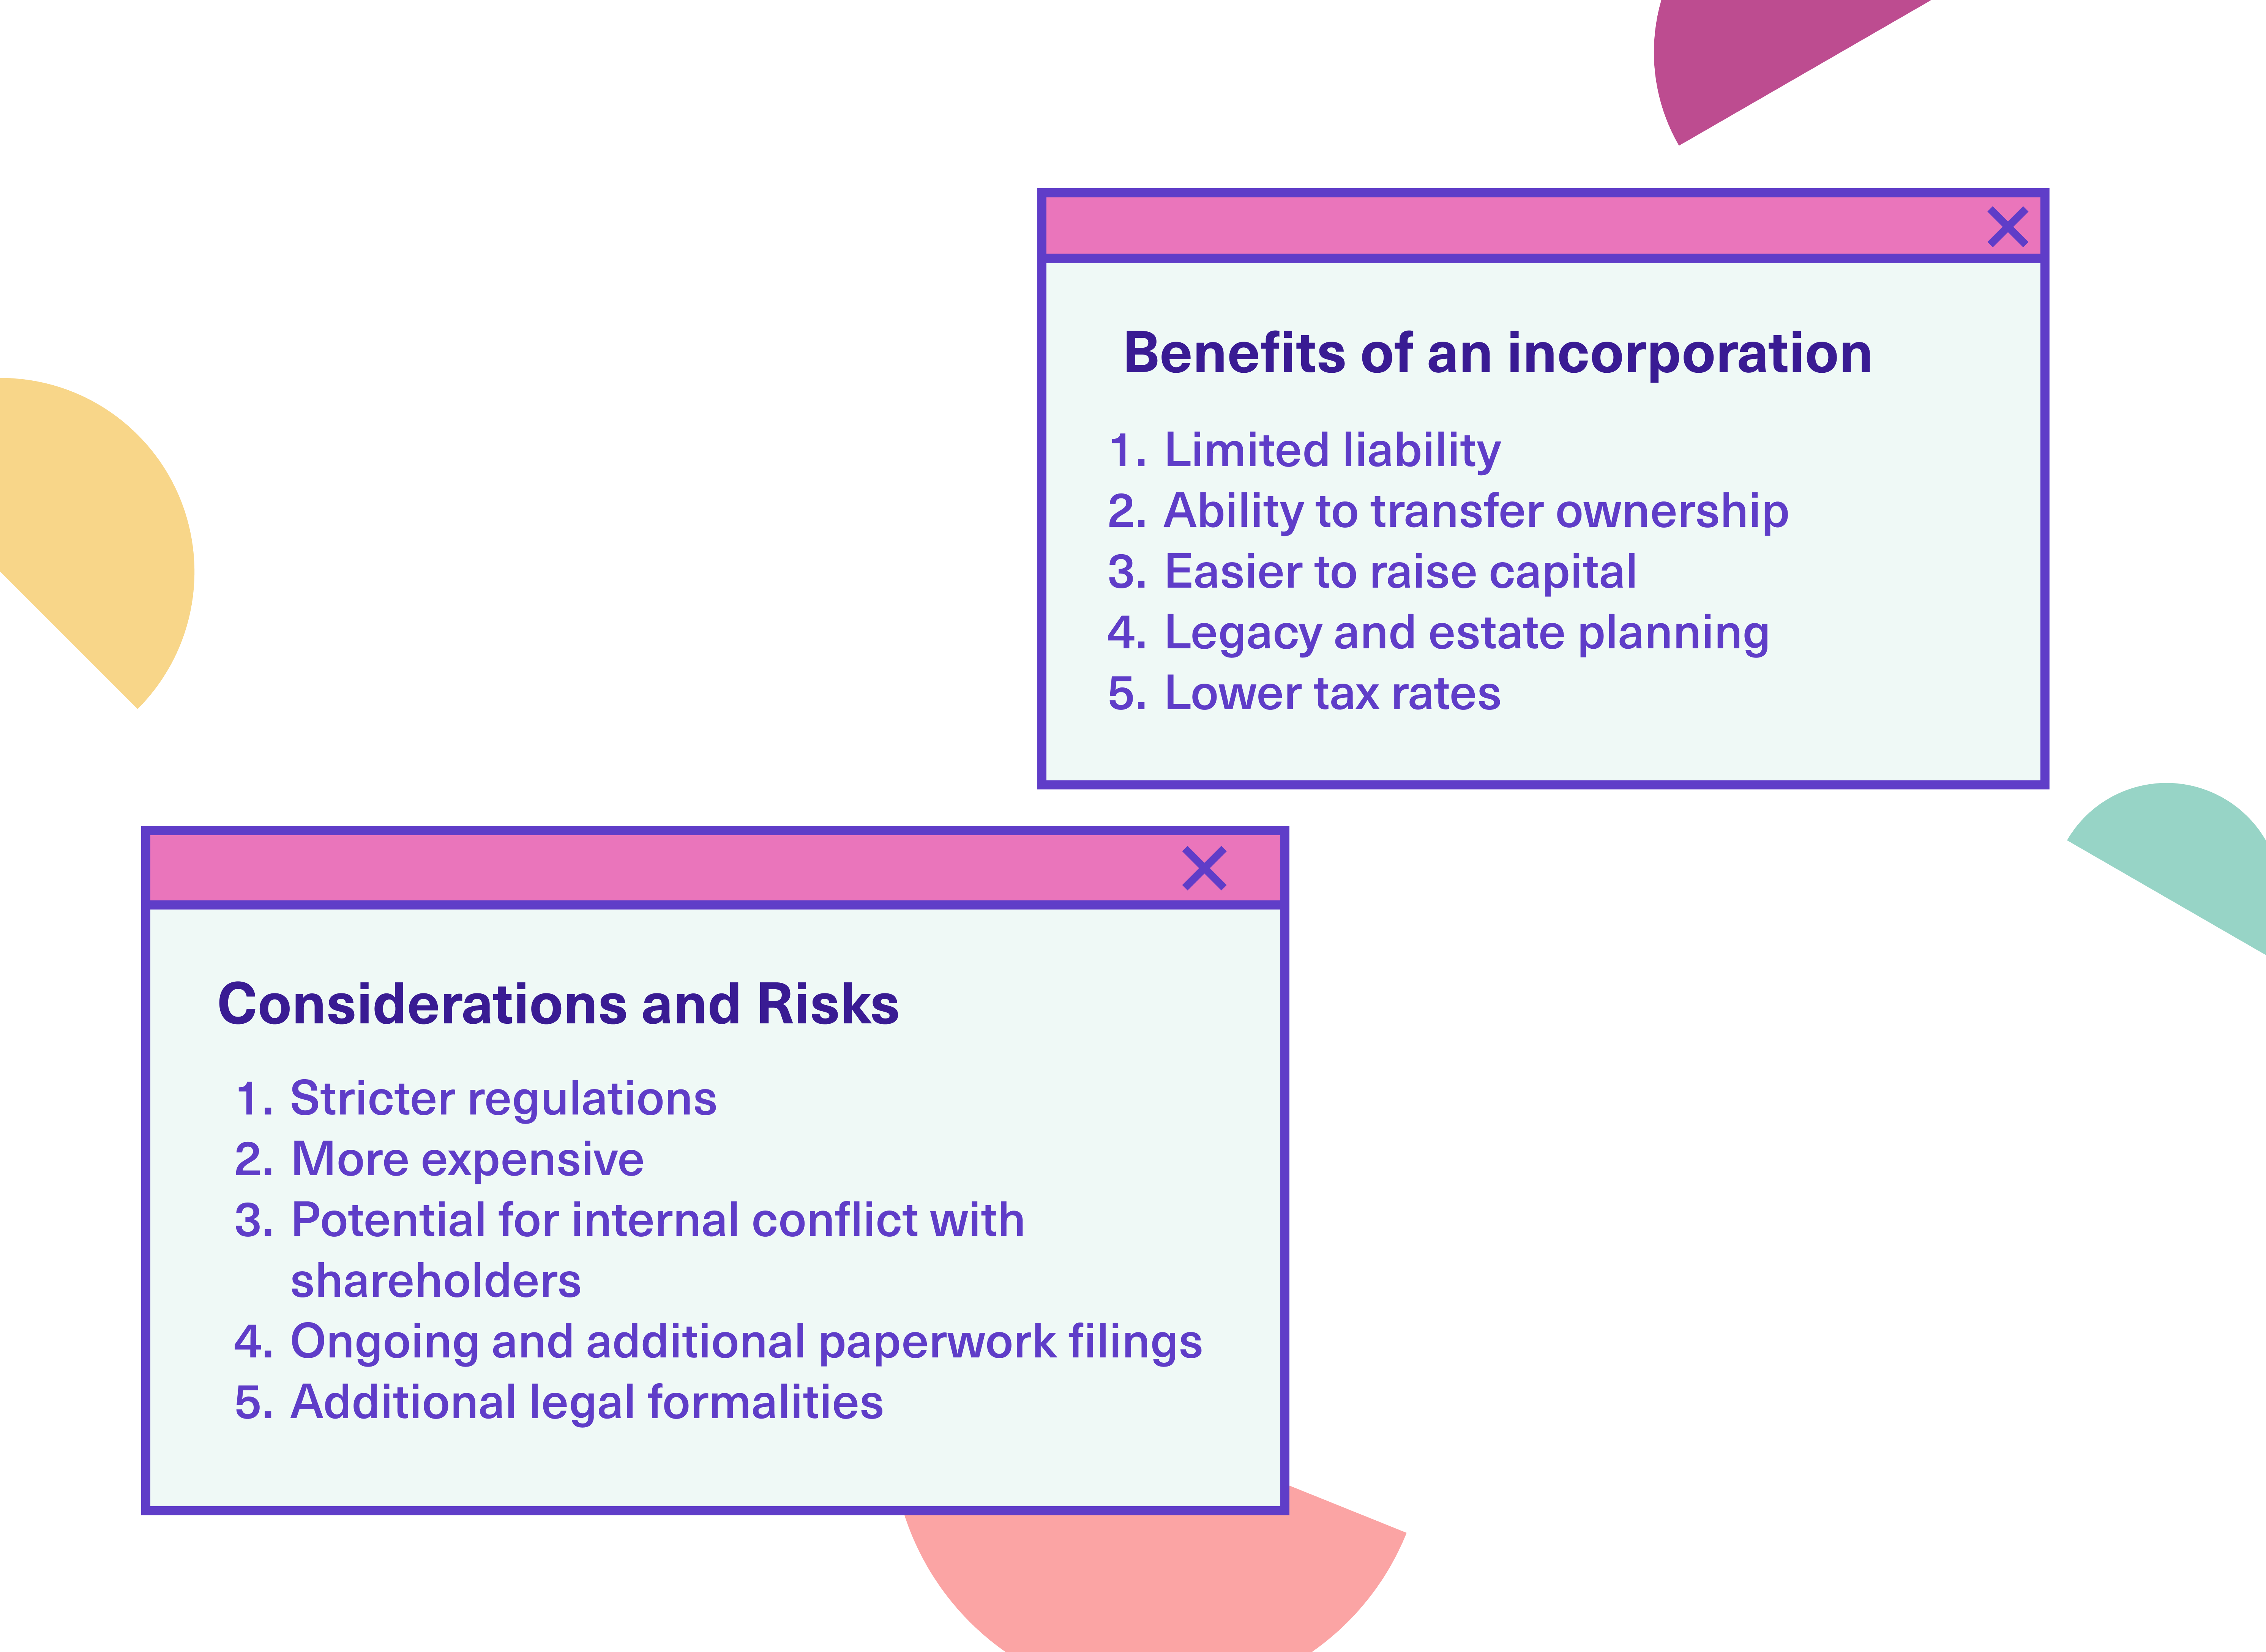 An infographic showing the pros and cons of an incorporation